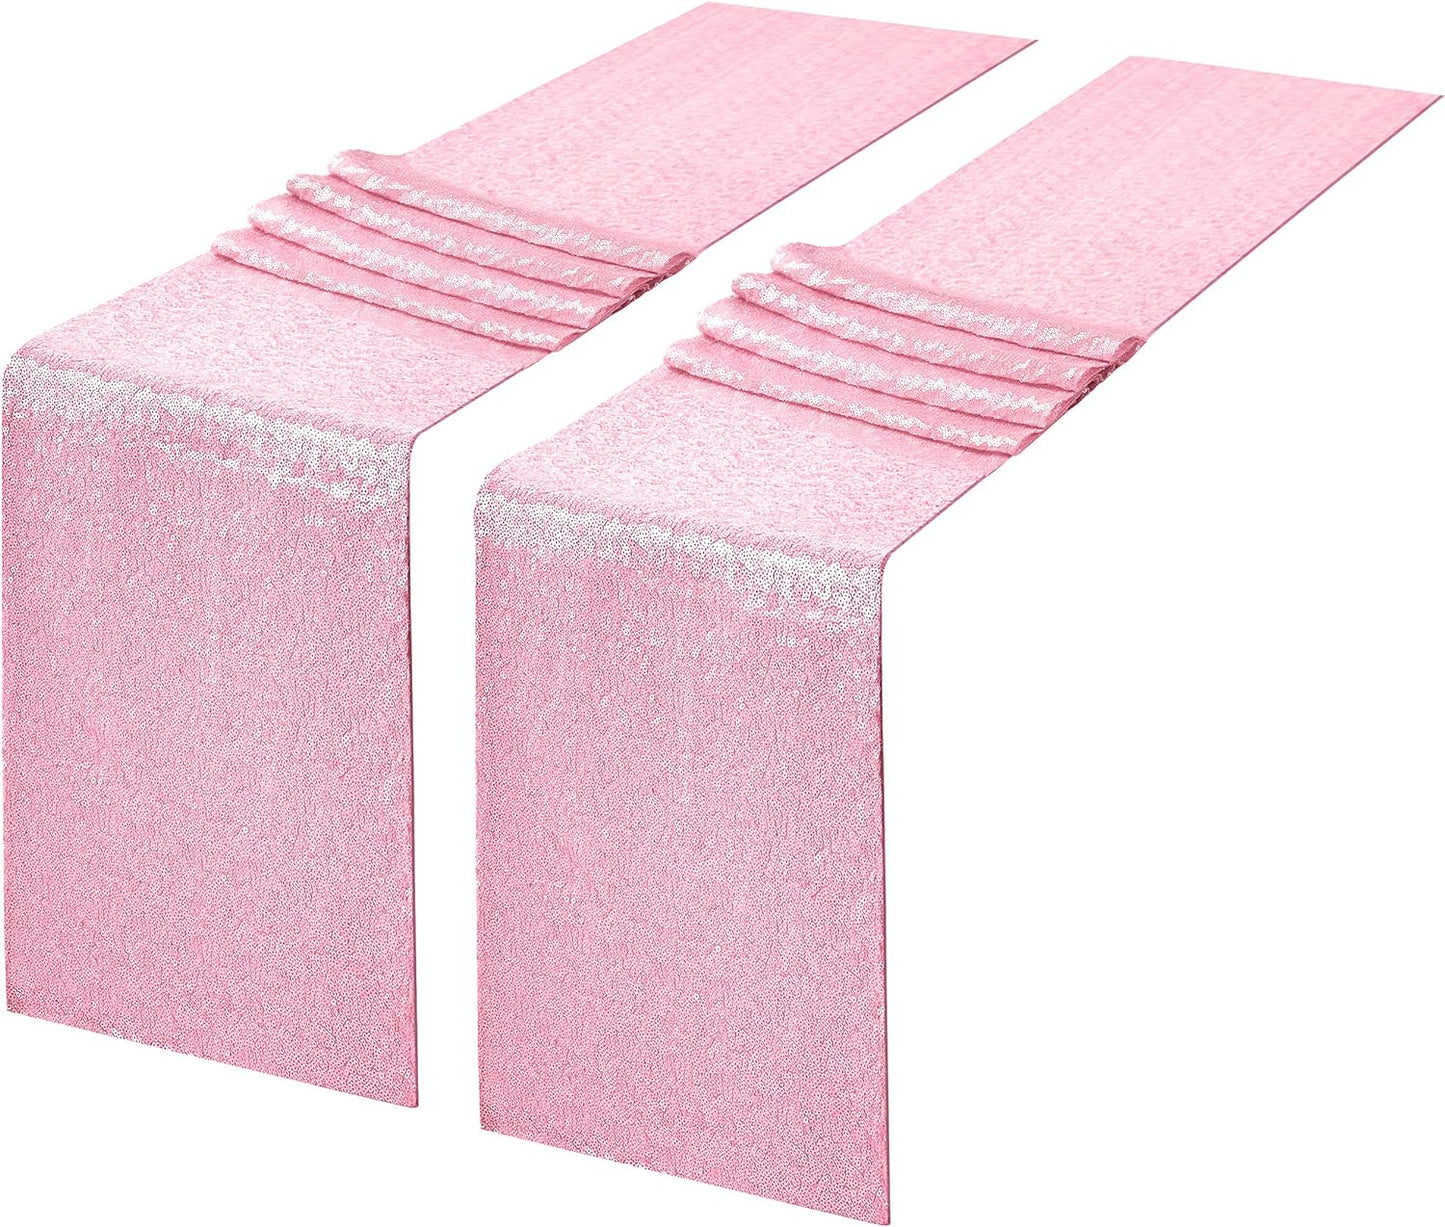 2 Packs 12 X 108 Inches Pink Sequin Table Runner, Glitter Pink Table Runner for Wedding Birthday Bachelorette Holiday Party Supplies Decorations Bridal Shower Baby Shower